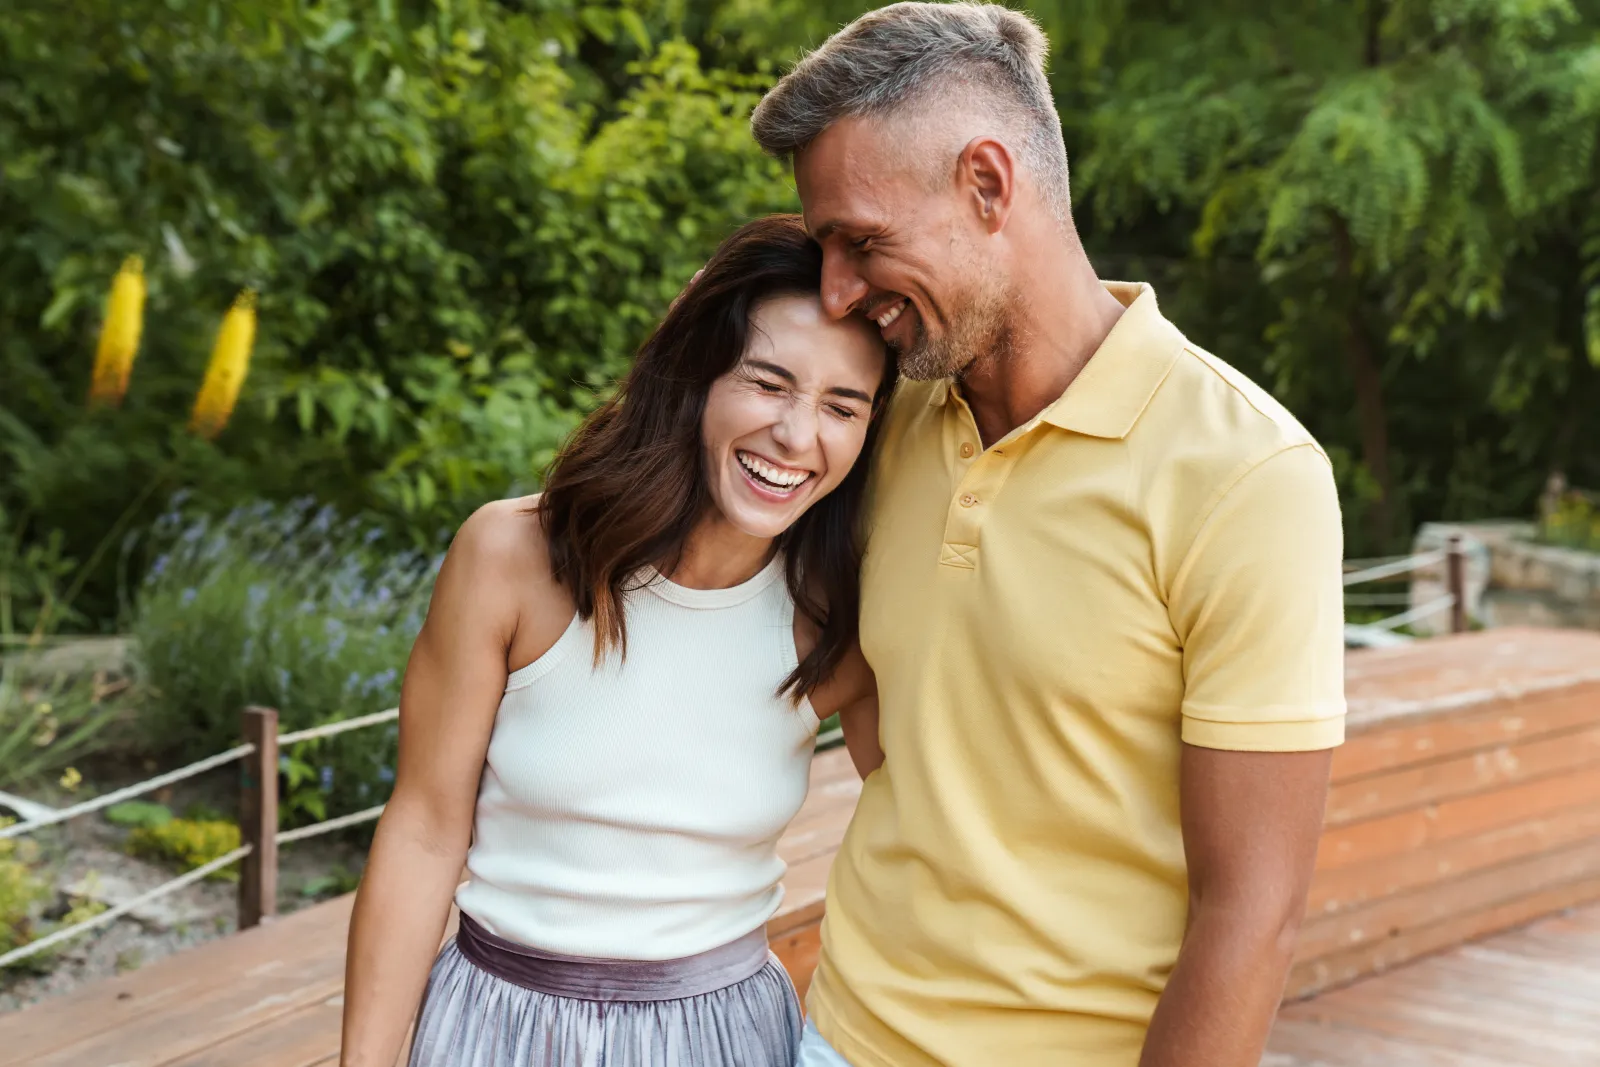 Healthy couple holding each other outdoors as they laugh together